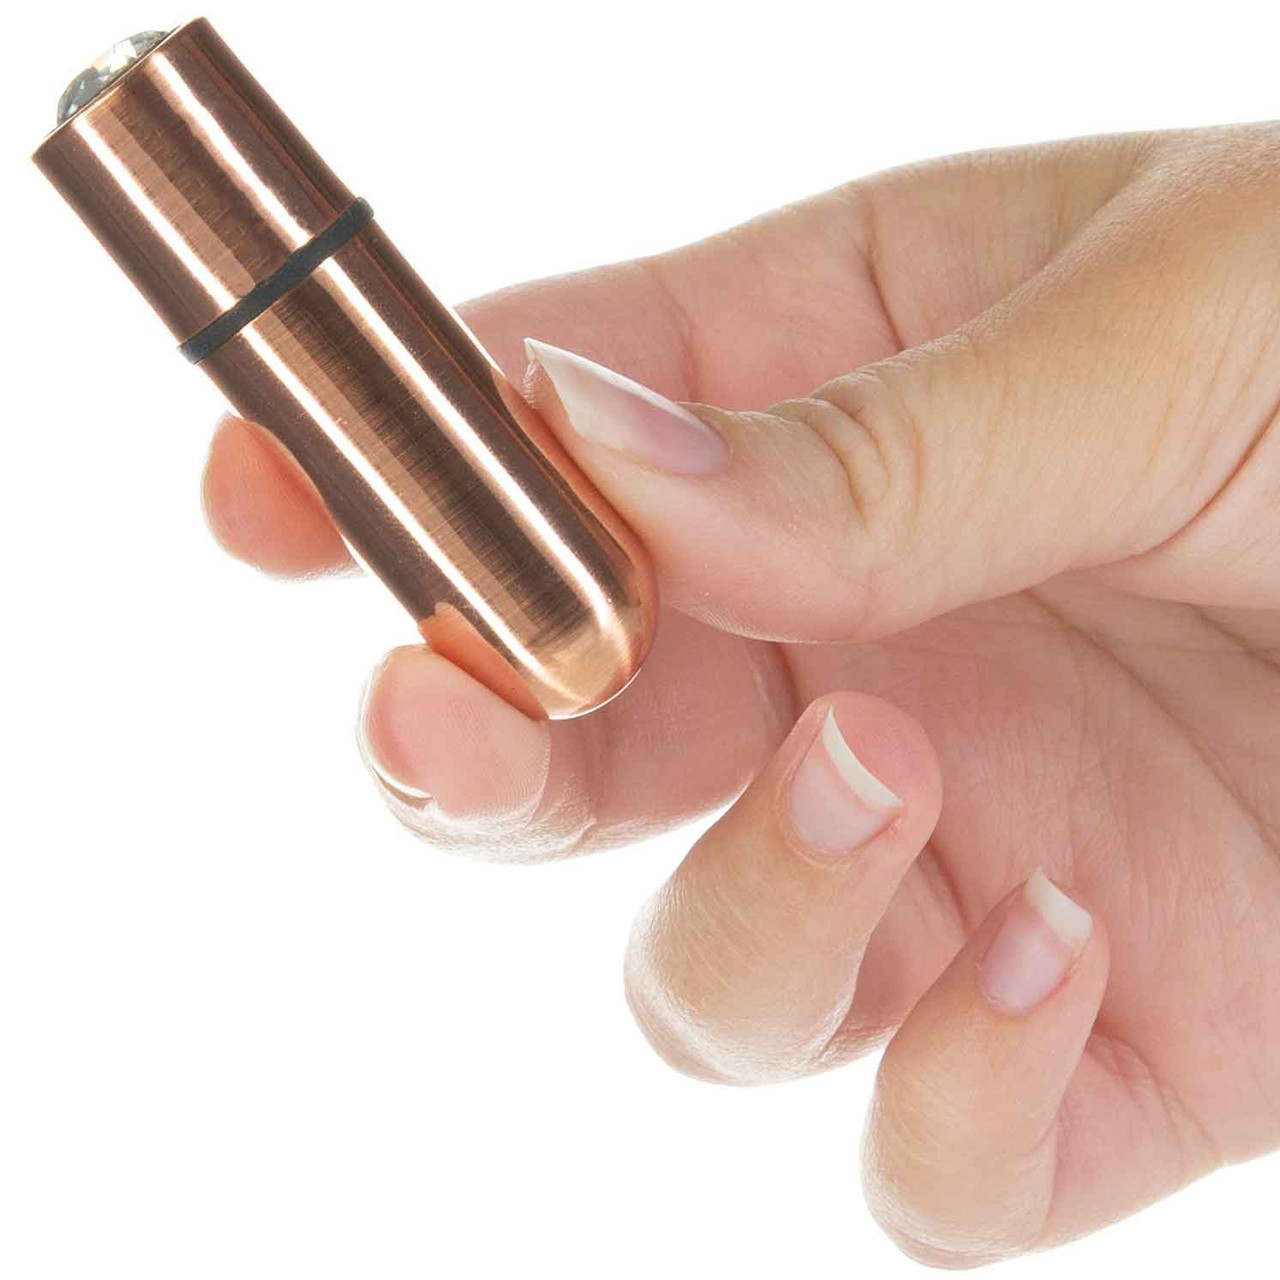 PowerBullet First Class Rechargeable Mini Bullet Vibrator With Crystal  Button & Key Chain Pouch - Rose Gold